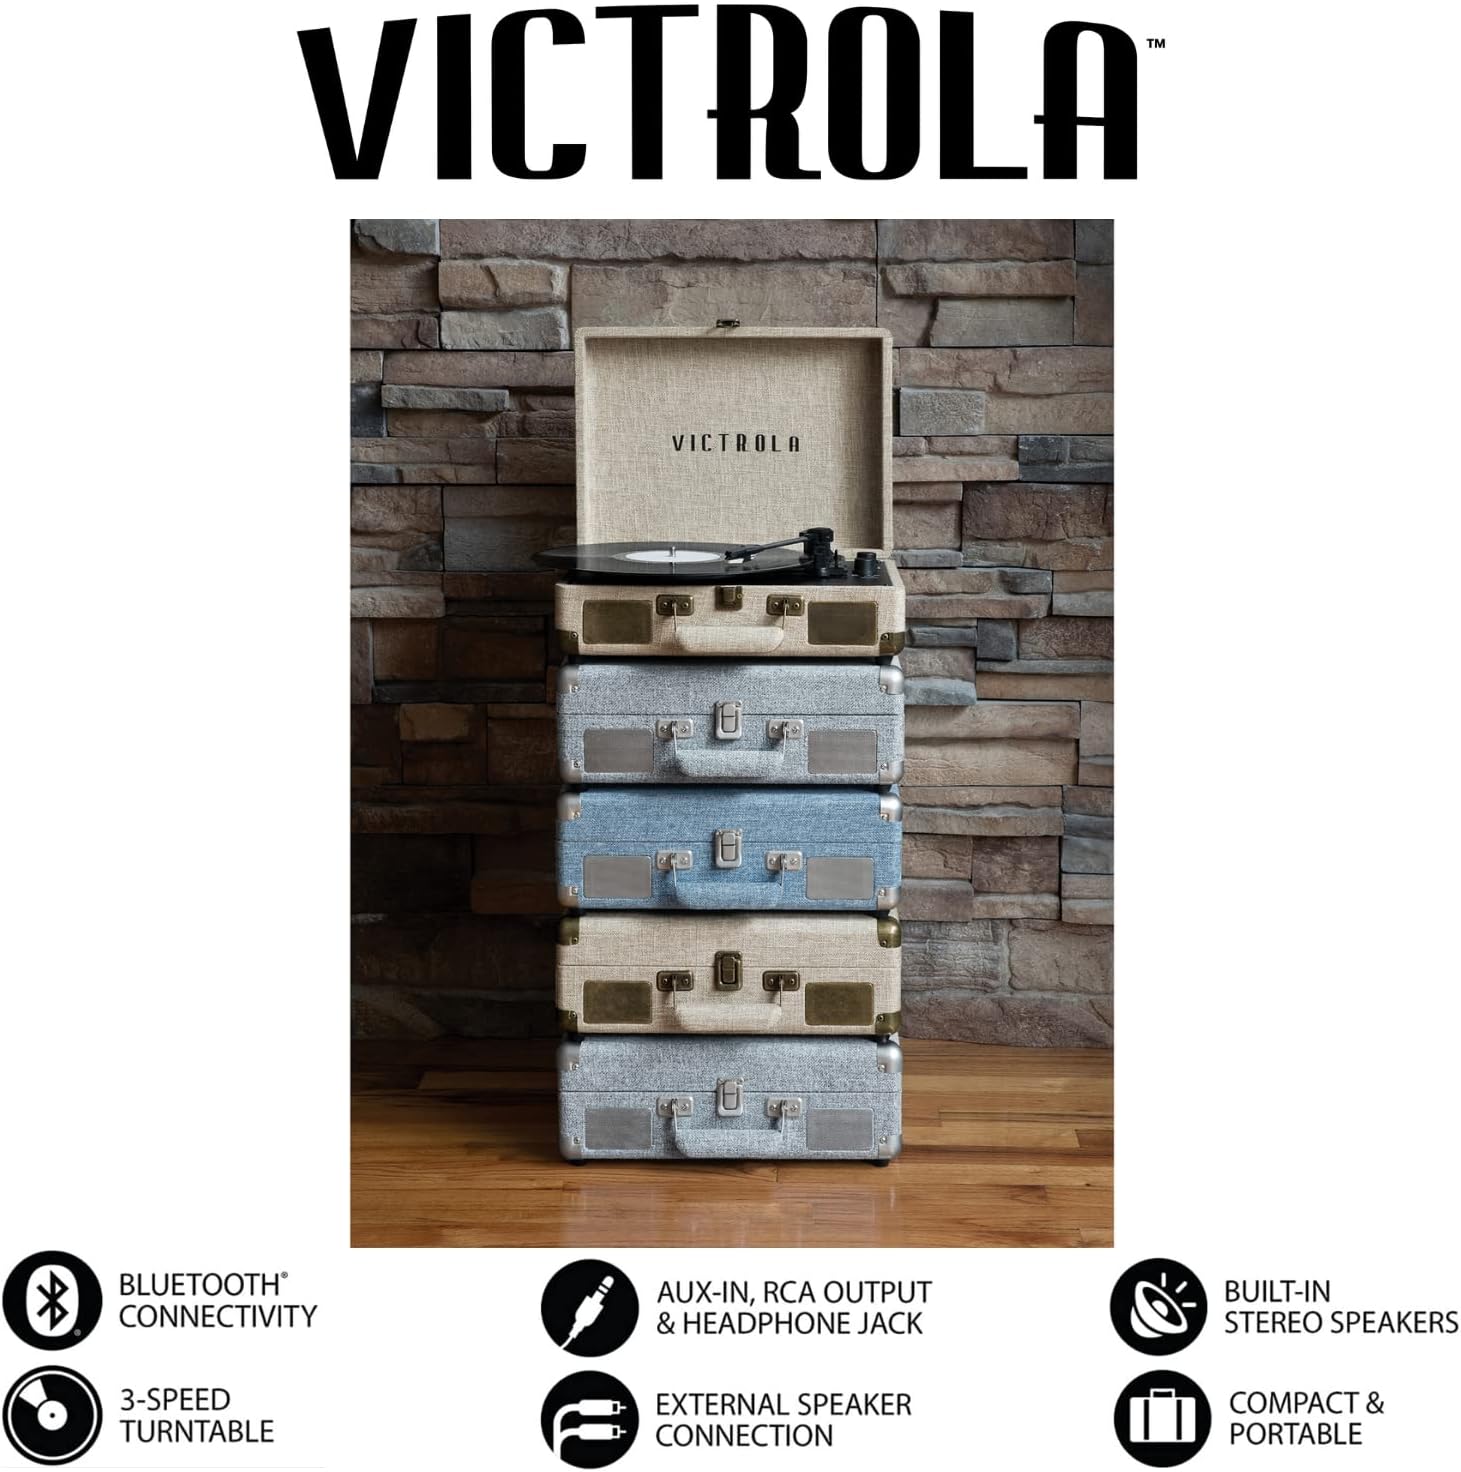 Victrola Vintage 3-Speed Bluetooth Portable Suitcase Record Player with Built-in Speakers | Upgraded Turntable Audio Sound| Includes Extra Stylus | Black, Model Number: VSC-550BT-BK, 1SFA